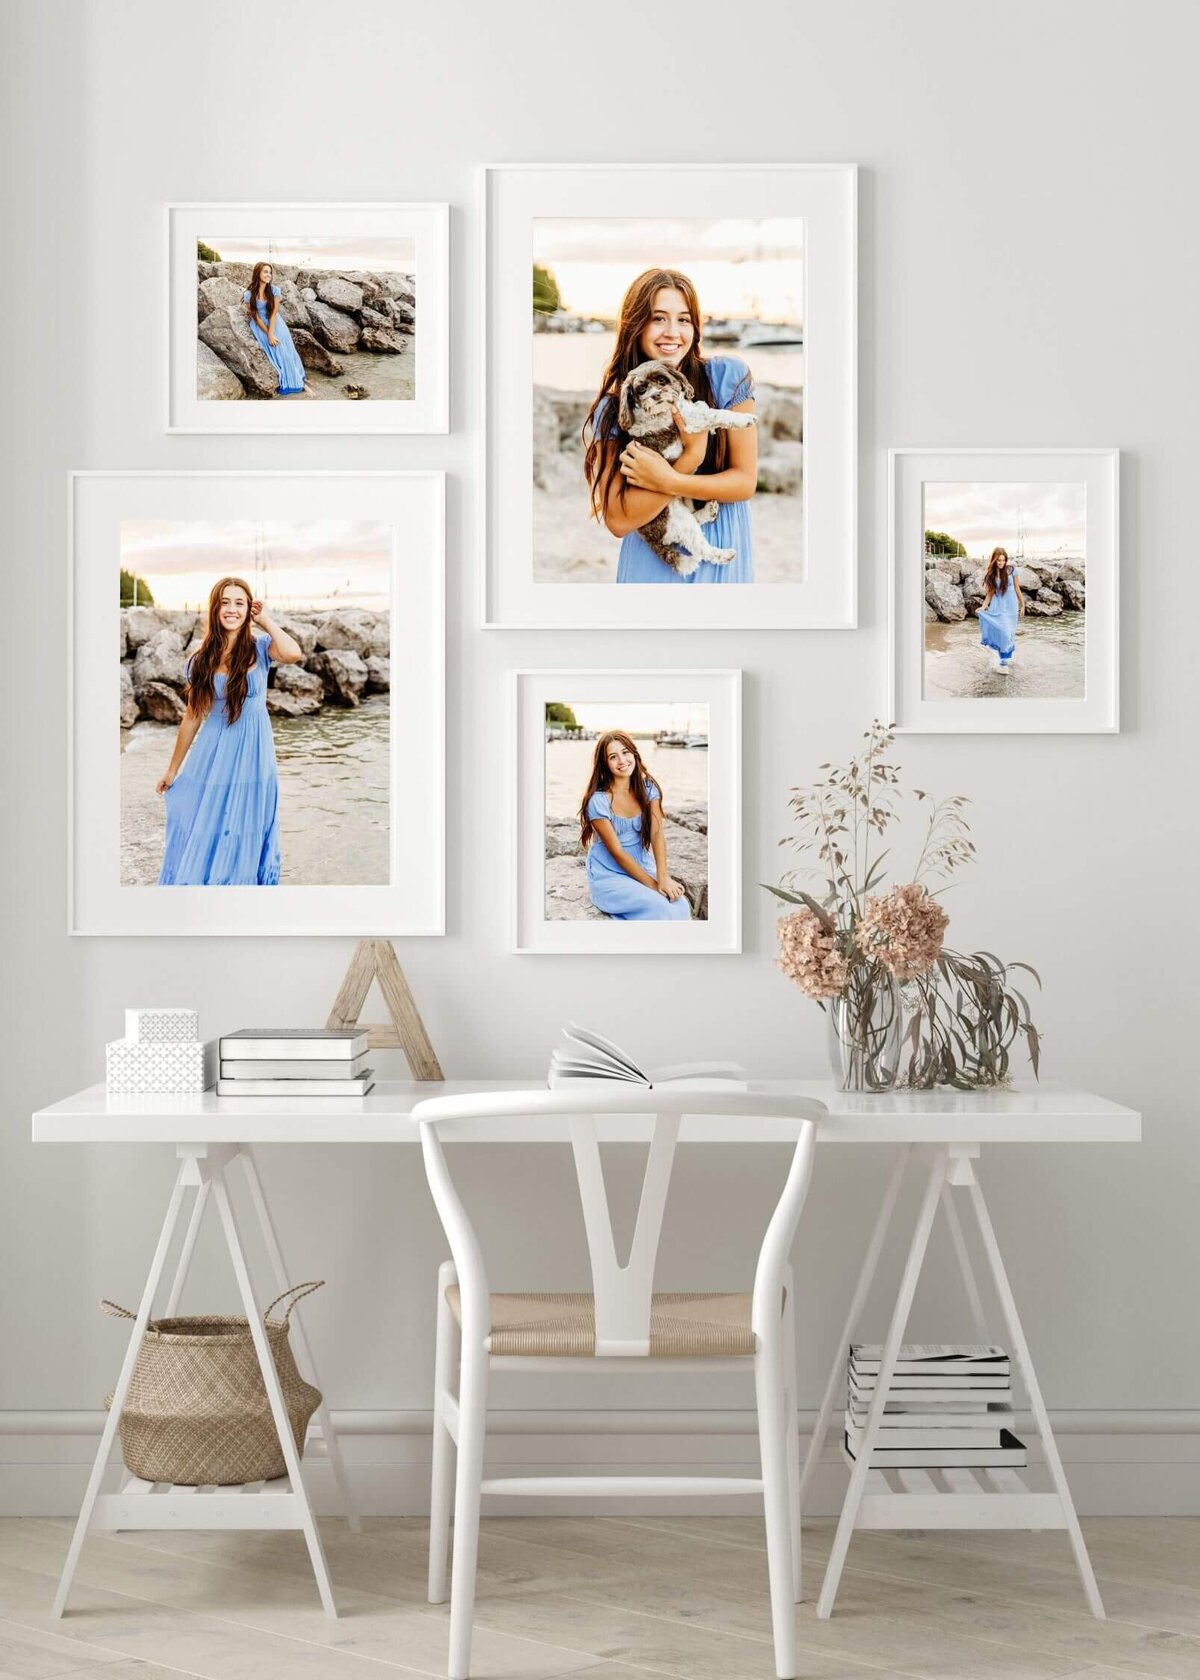 picture of 5 high school senior photos of a girl in a blue dress photos hanging in matted frames hanging over a white desk